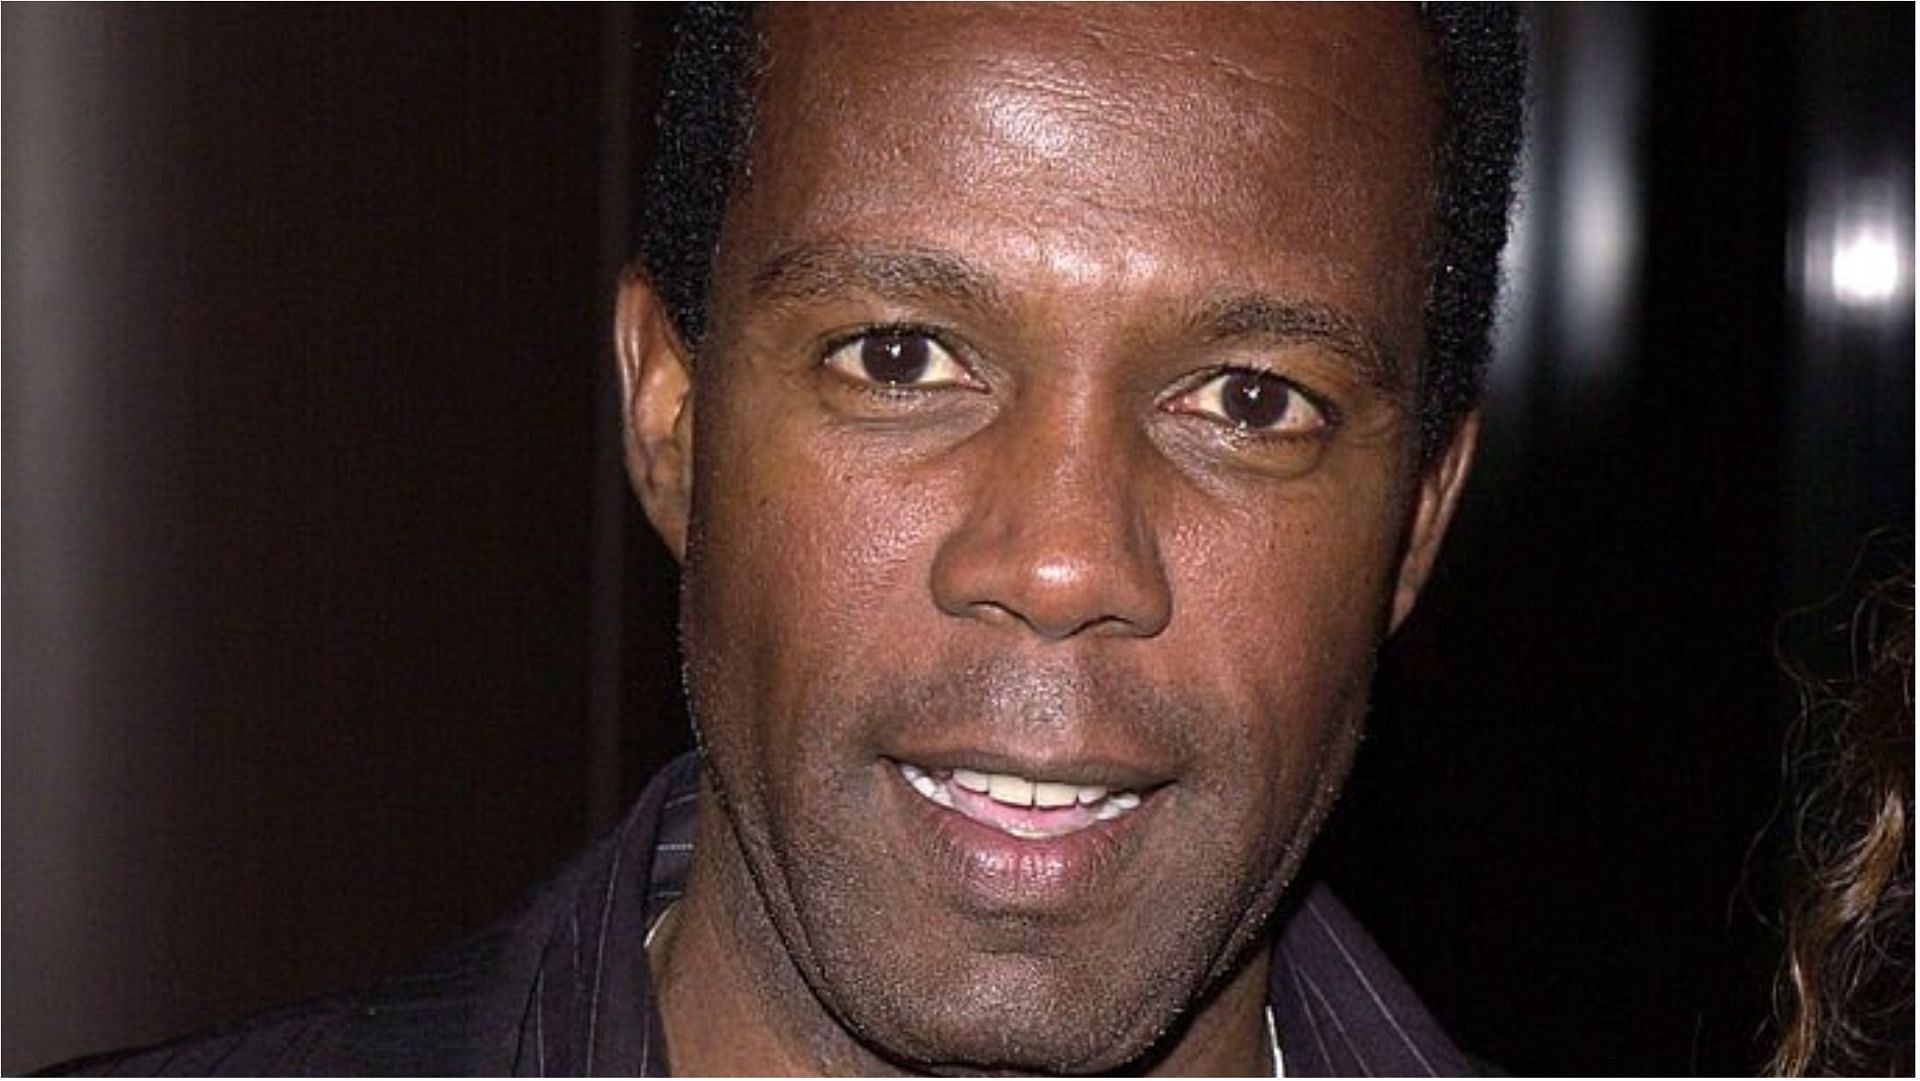 Clarence Gilyard recently died at the age of 66 (Image via J.P. Aussenard/Getty Images)